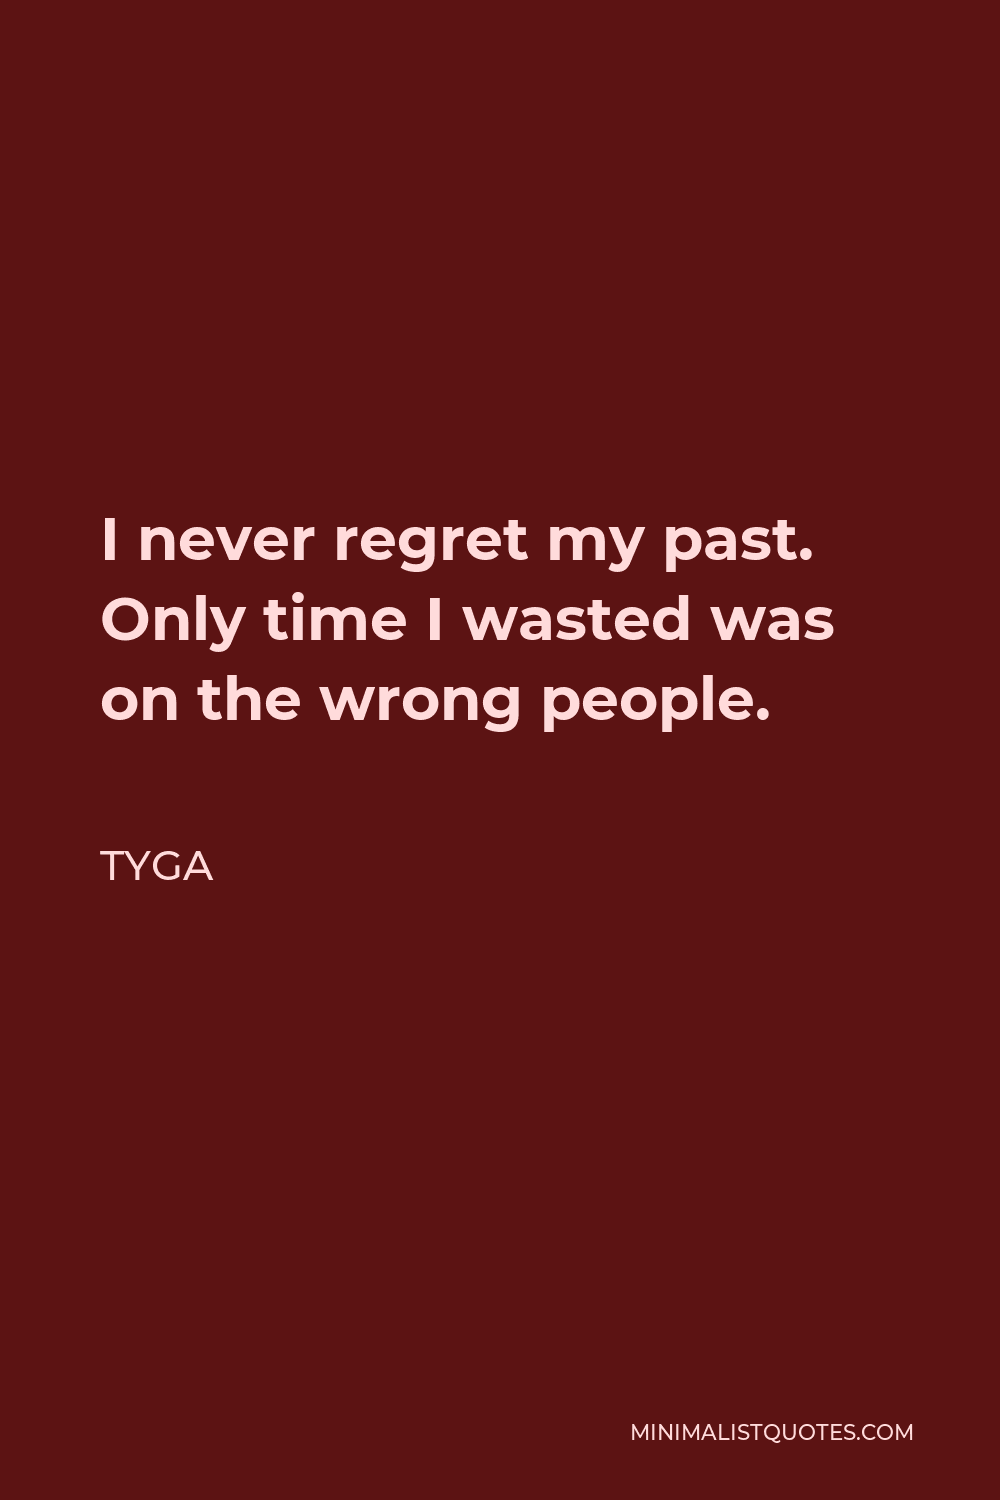 Tyga Quote - I never regret my past. Only time I wasted was on the wrong people.